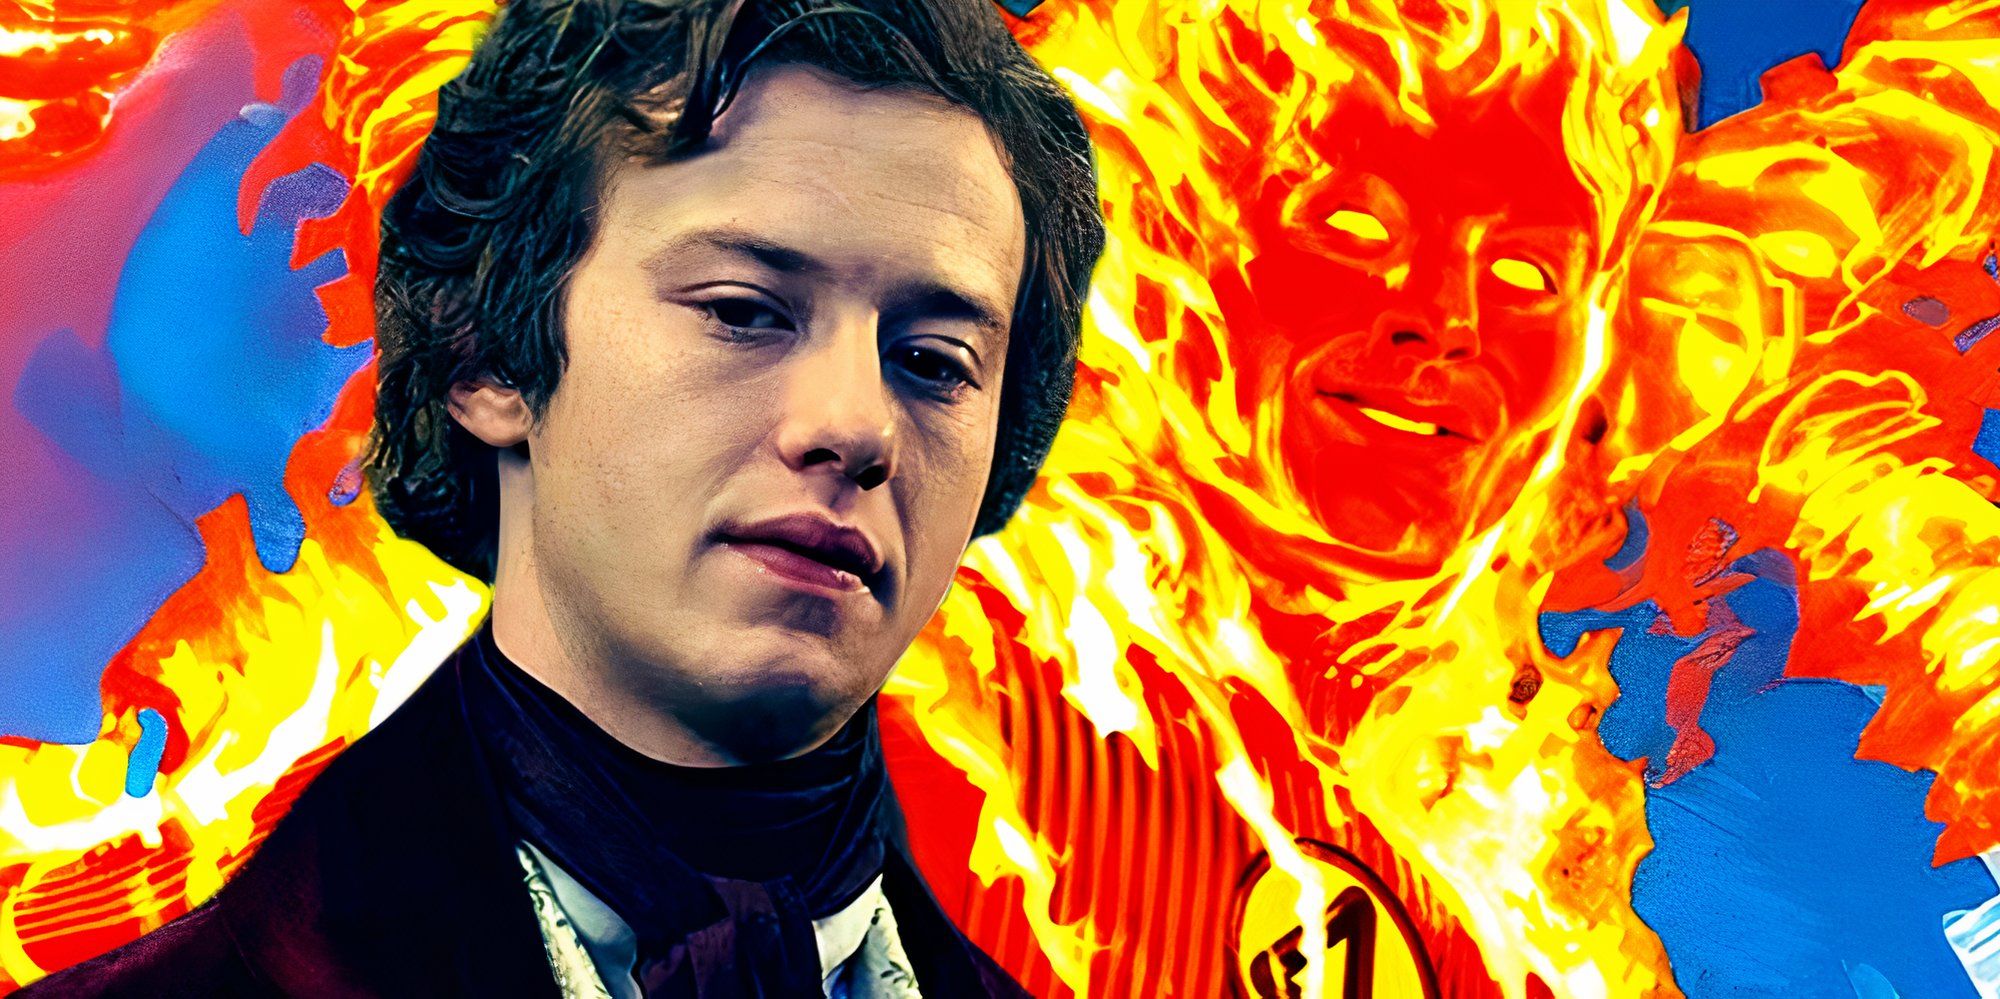 Joseph Quinn looks at the camera as Arthur Havisham in Dickensian and the Human Torch flies in the MCU's The Fantastic Four official image